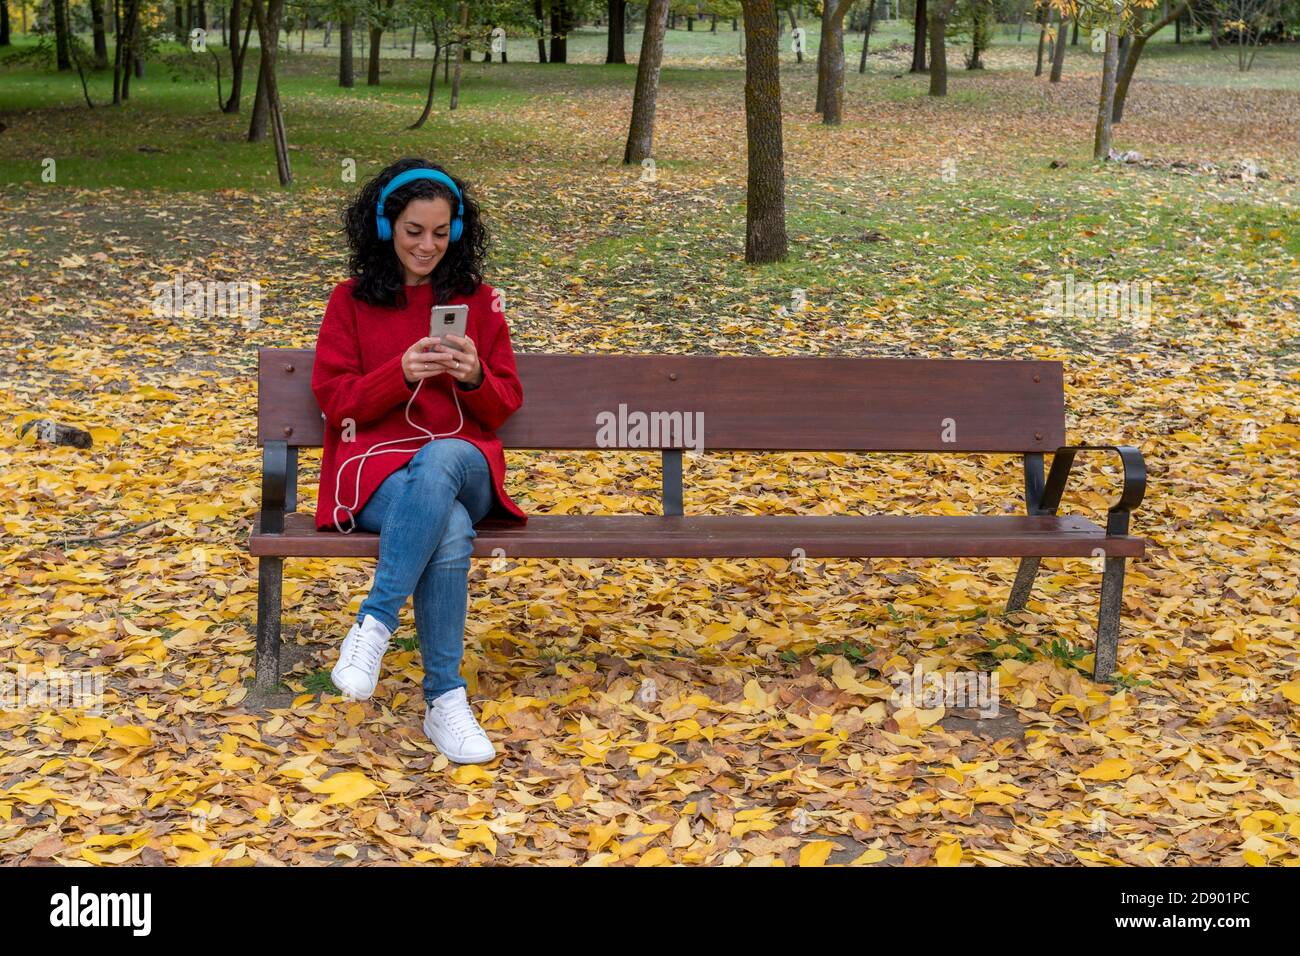 young brunette woman sitting in a park listening to music with her cell phone and blue headphones. background of colored trees and fallen leaves Stock Photo